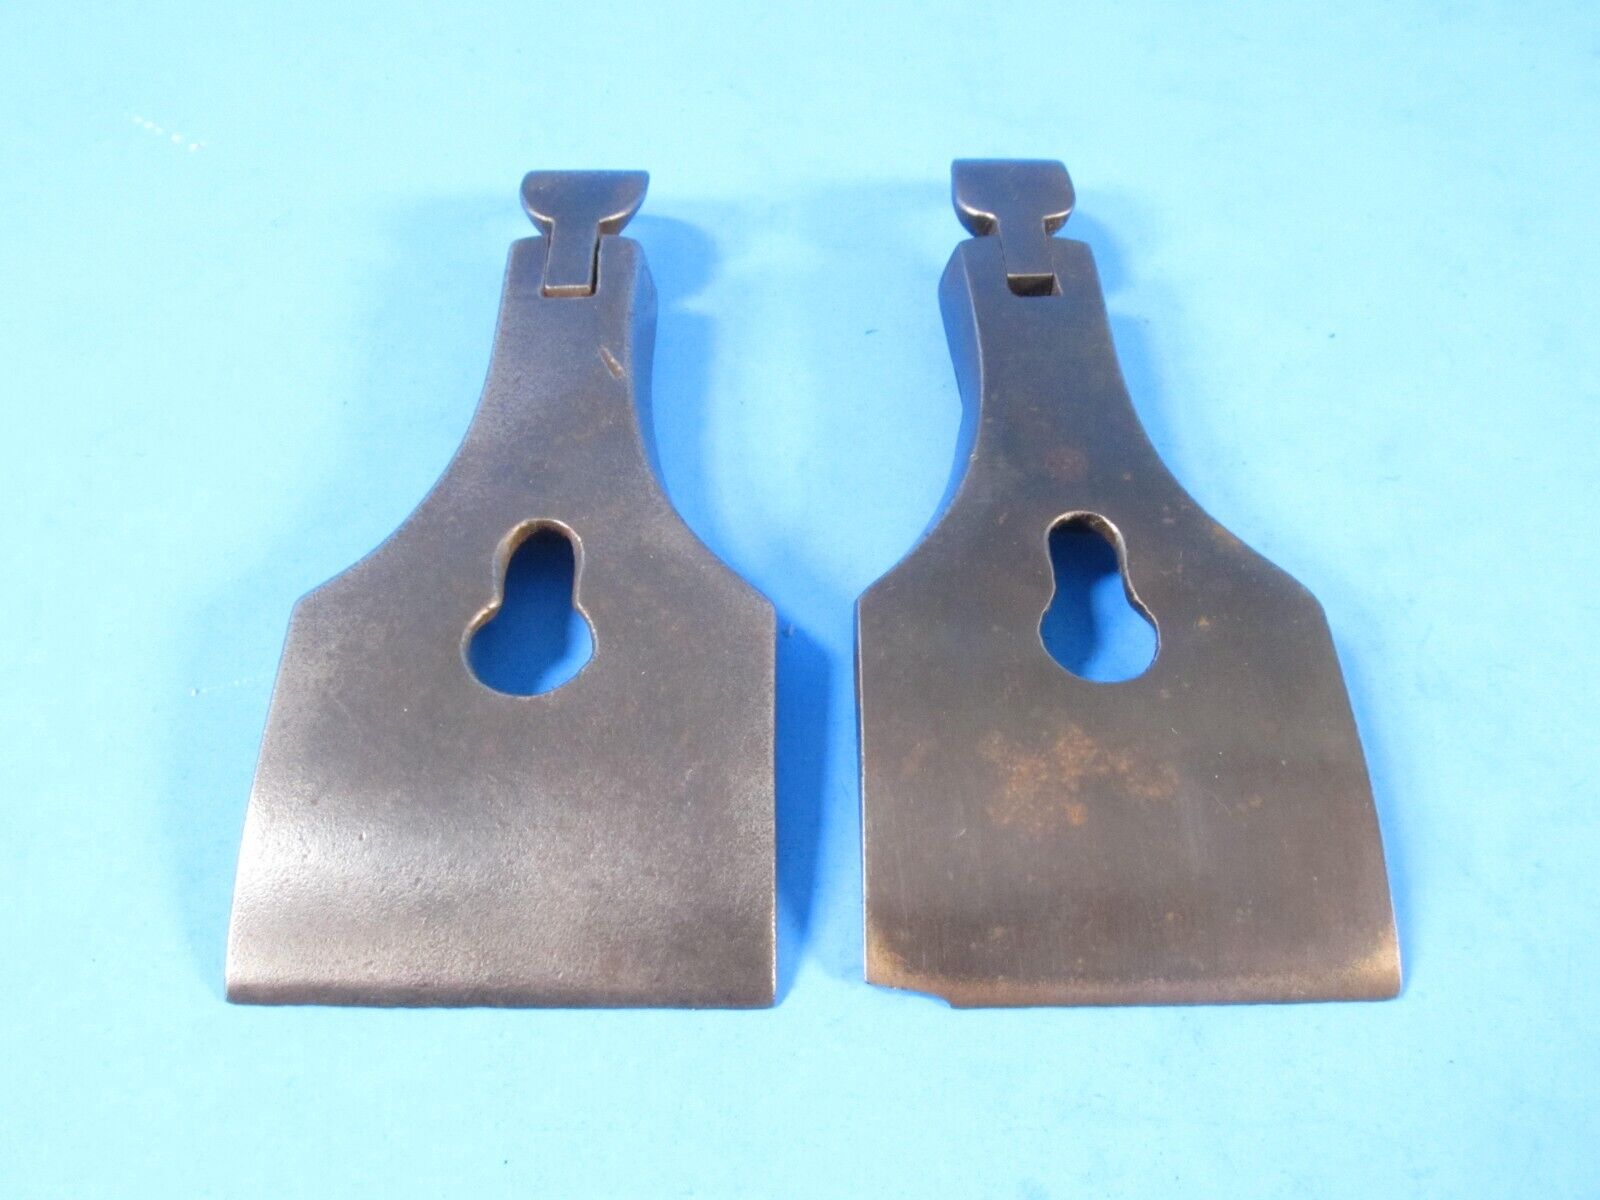 parts - lot of 2 keyhole lever caps for Ohio Tool No 04 05 similar wood planes